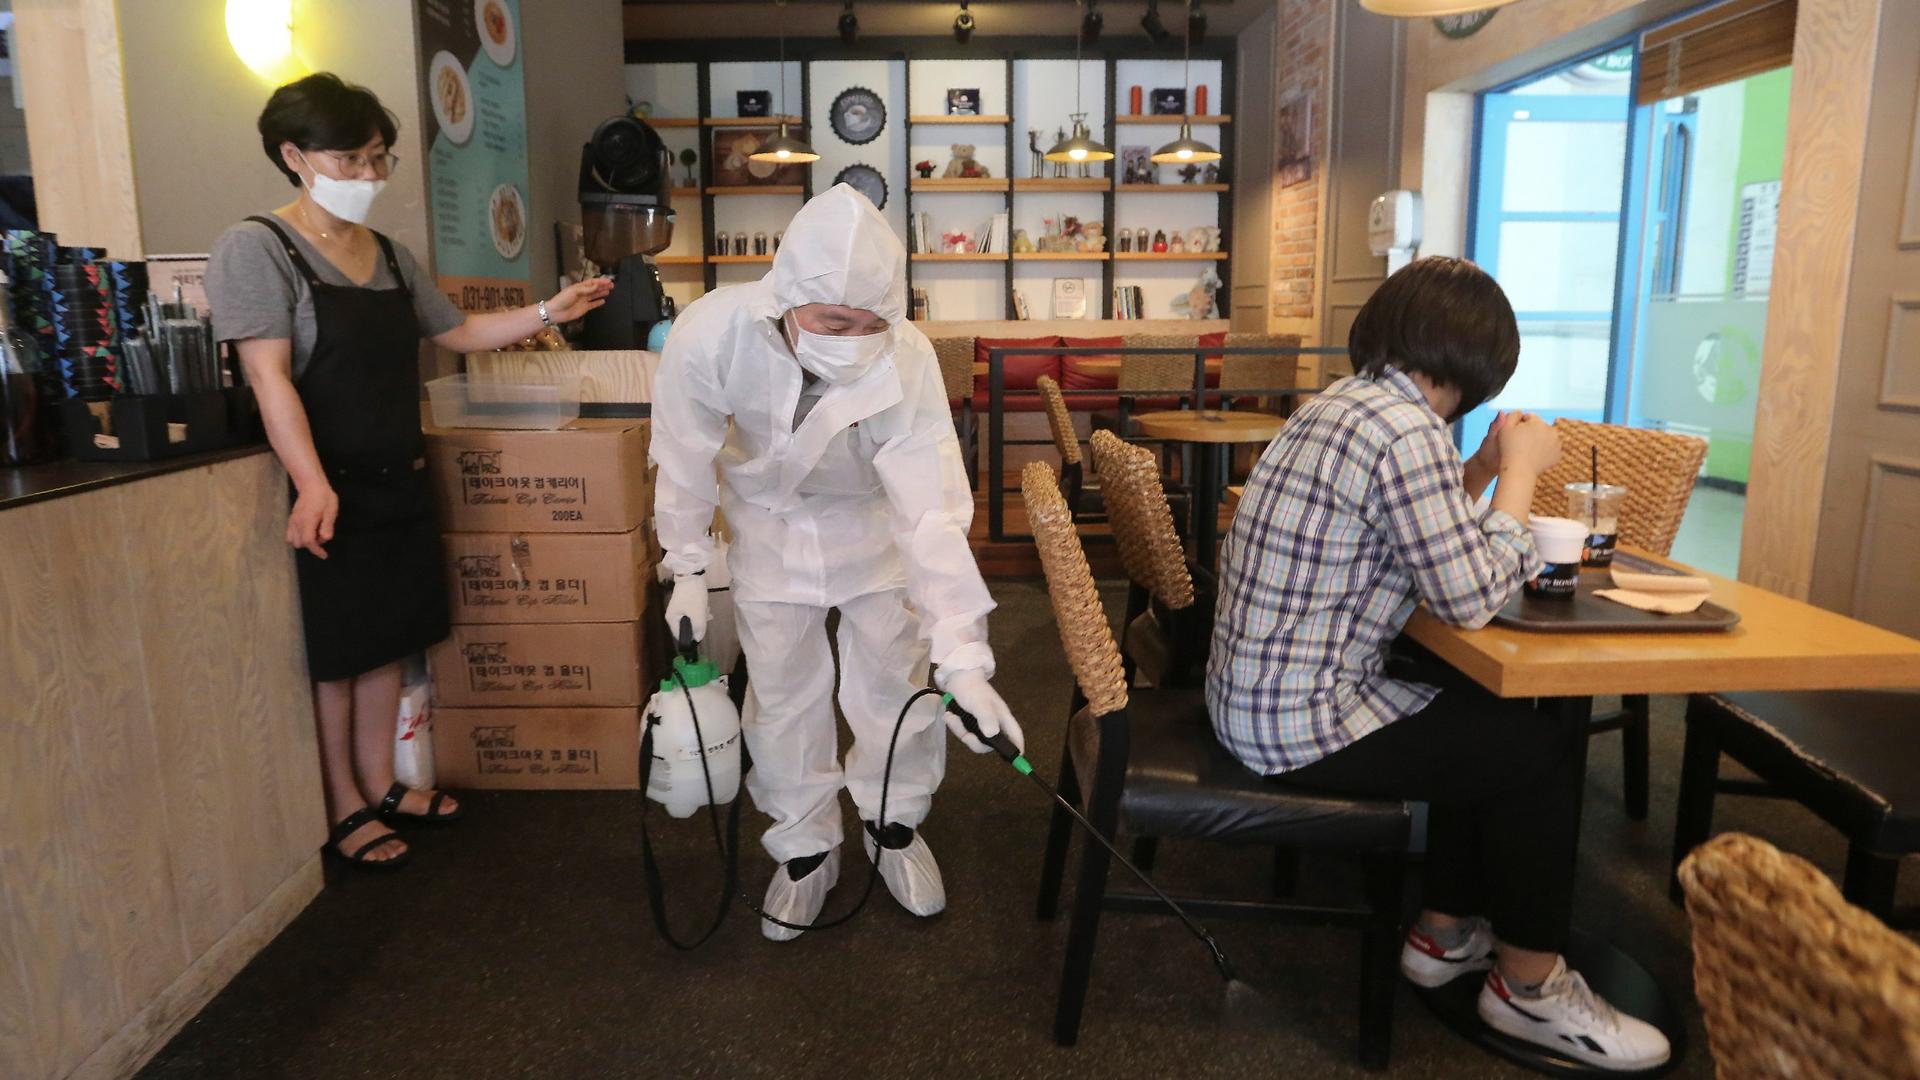 A worker dressed in white protective gear disinfects as a precaution against the coronavirus at a café in Goyang, South Korea, Aug. 25, 2020.  